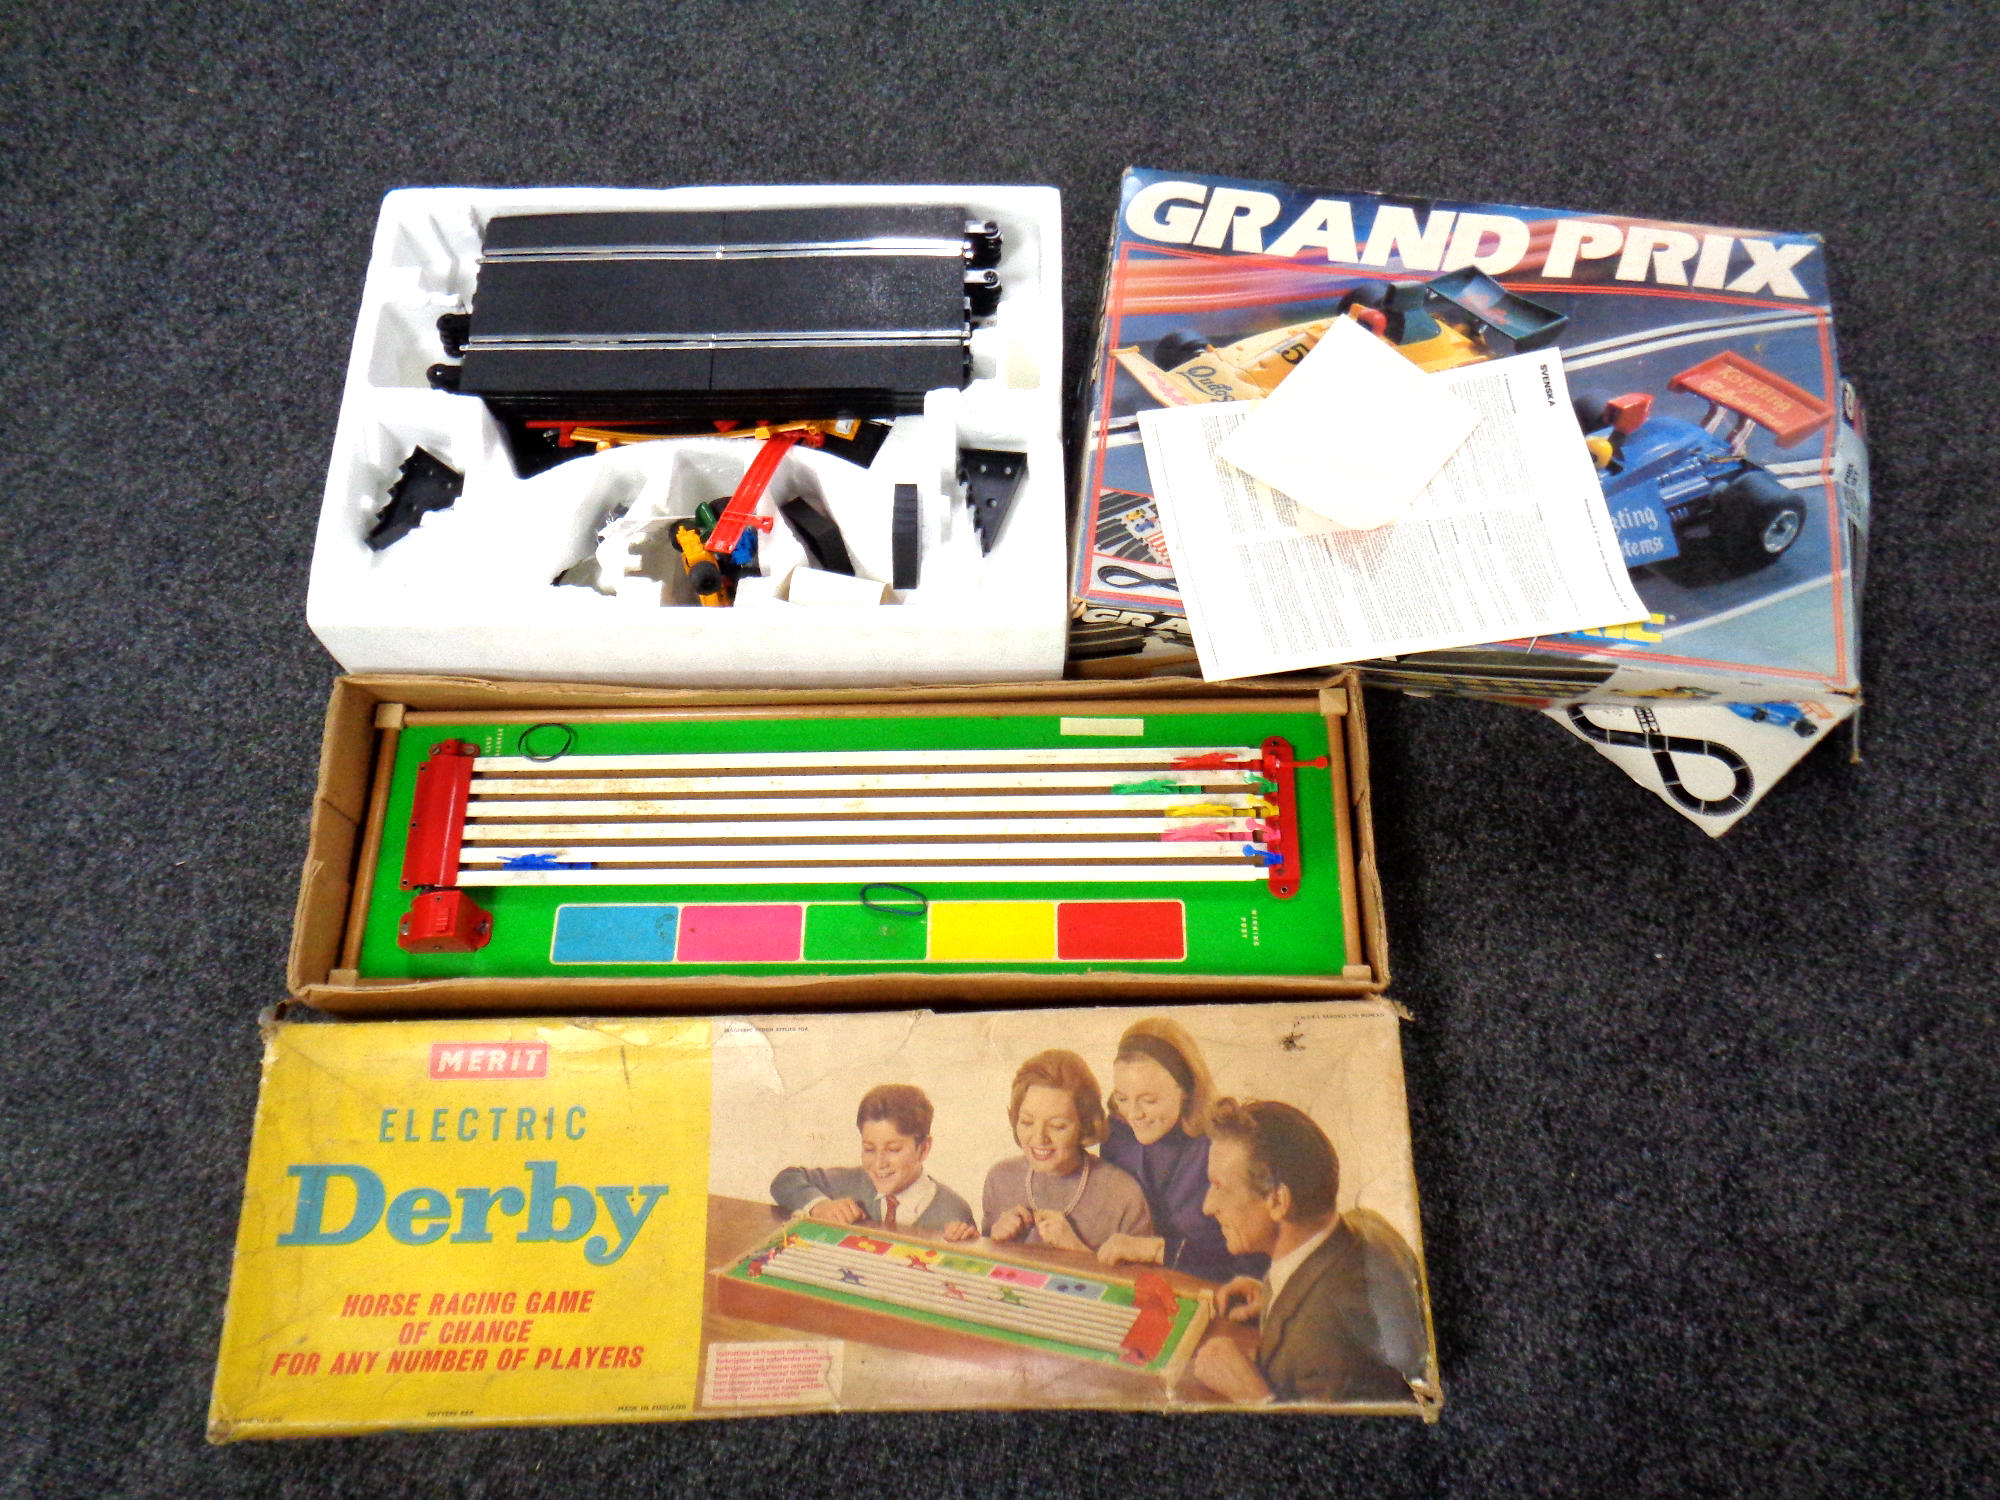 A Scalextric Grand prix racing set together with a Merit Derby horse racing game